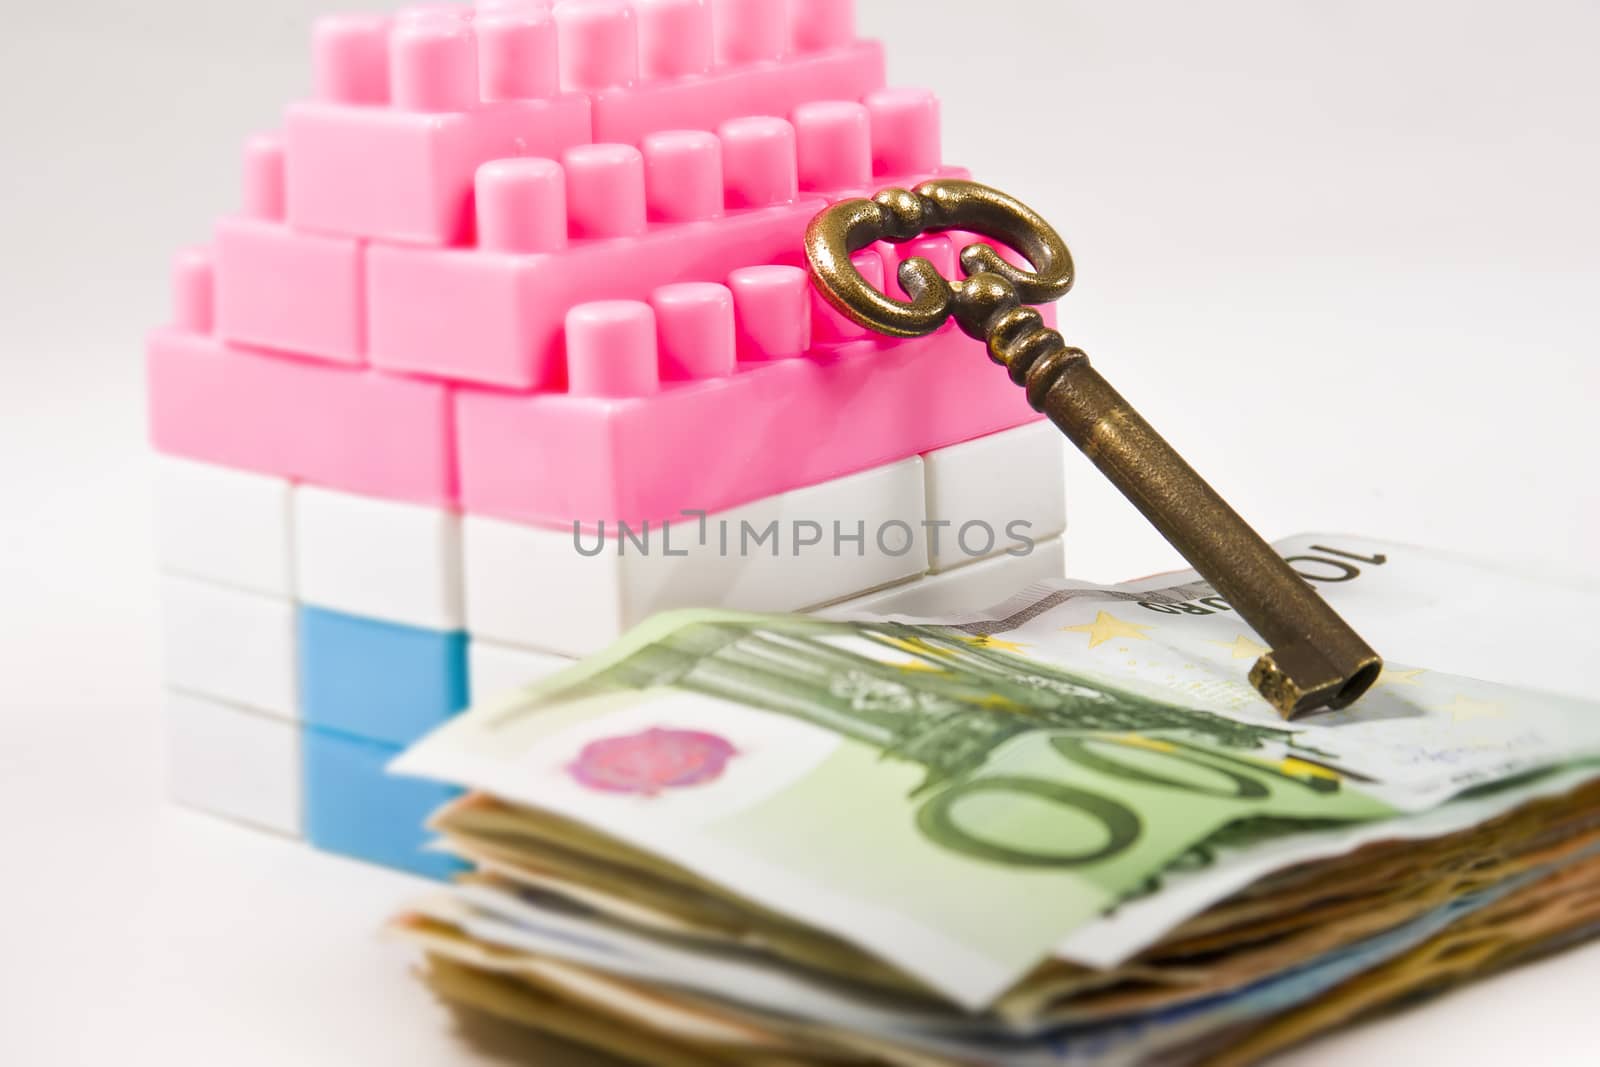  Miniature House with Key on a banknotes pile  isolated on white background